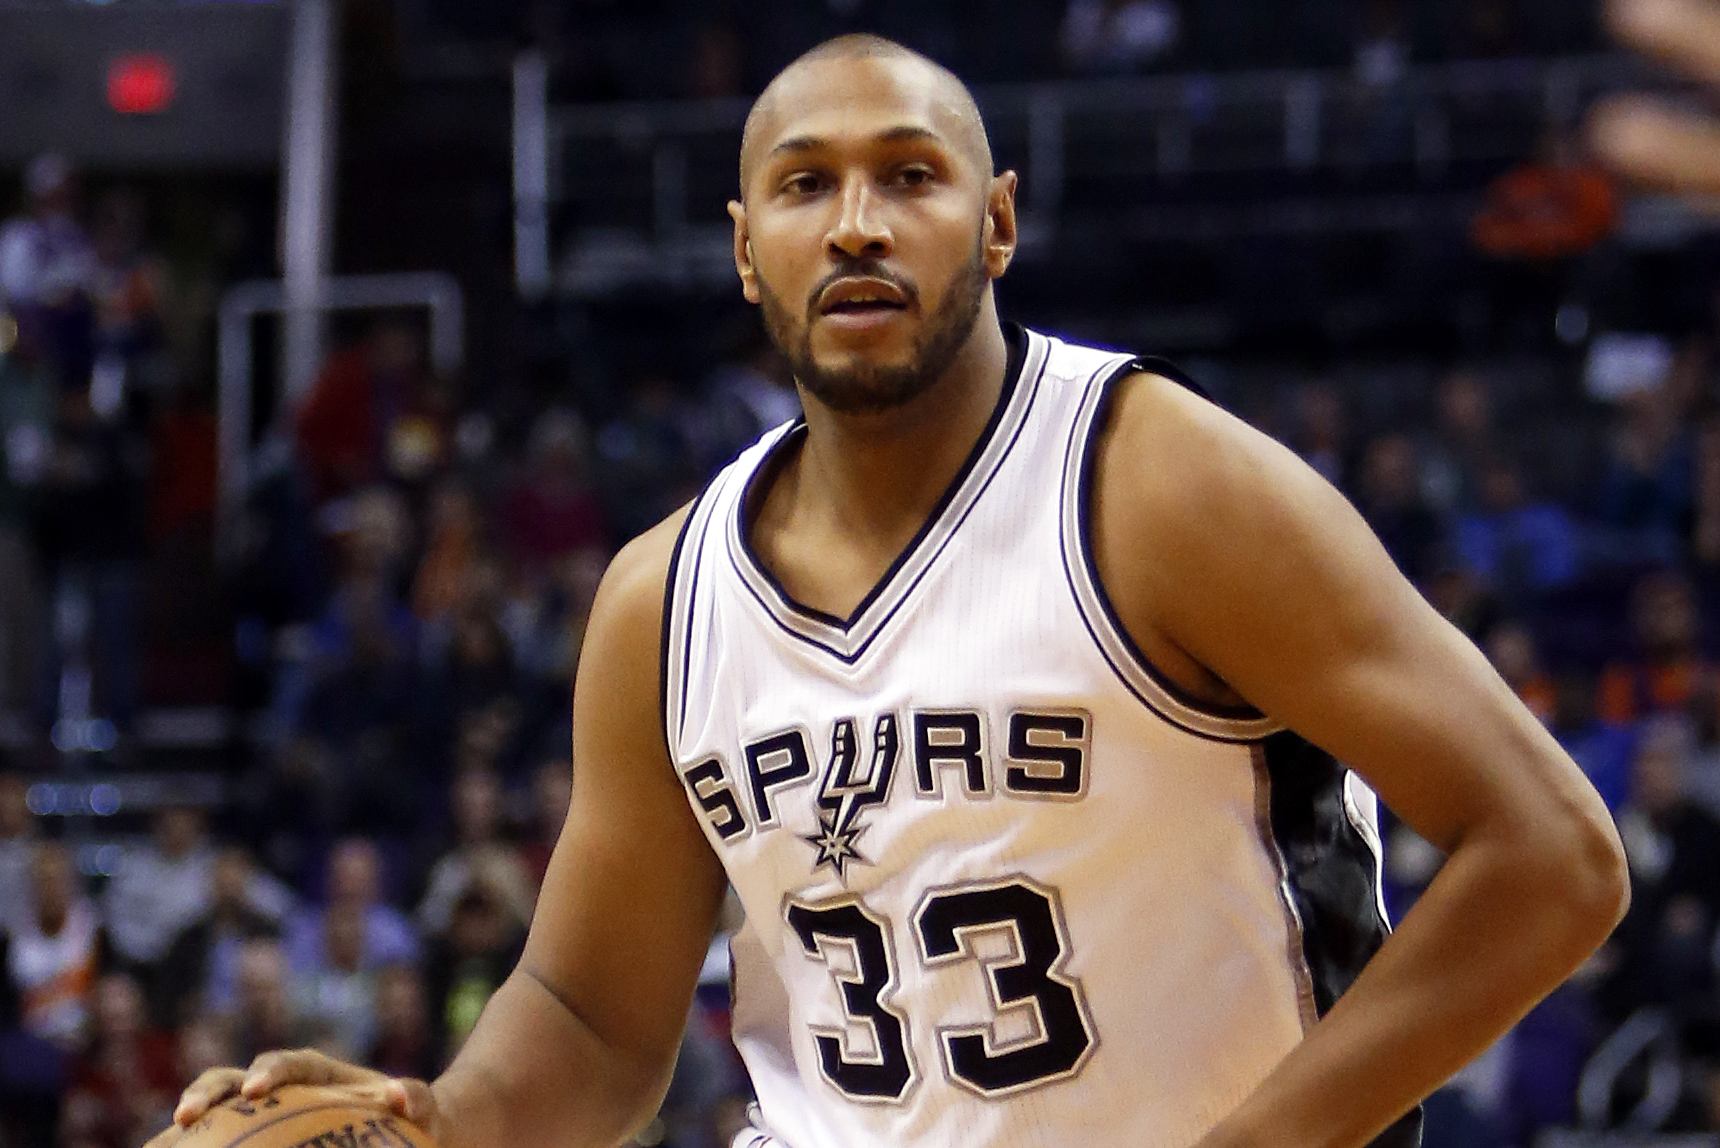 Spurs' Boris Diaw out 3-4 weeks due to back surgery - NBC Sports